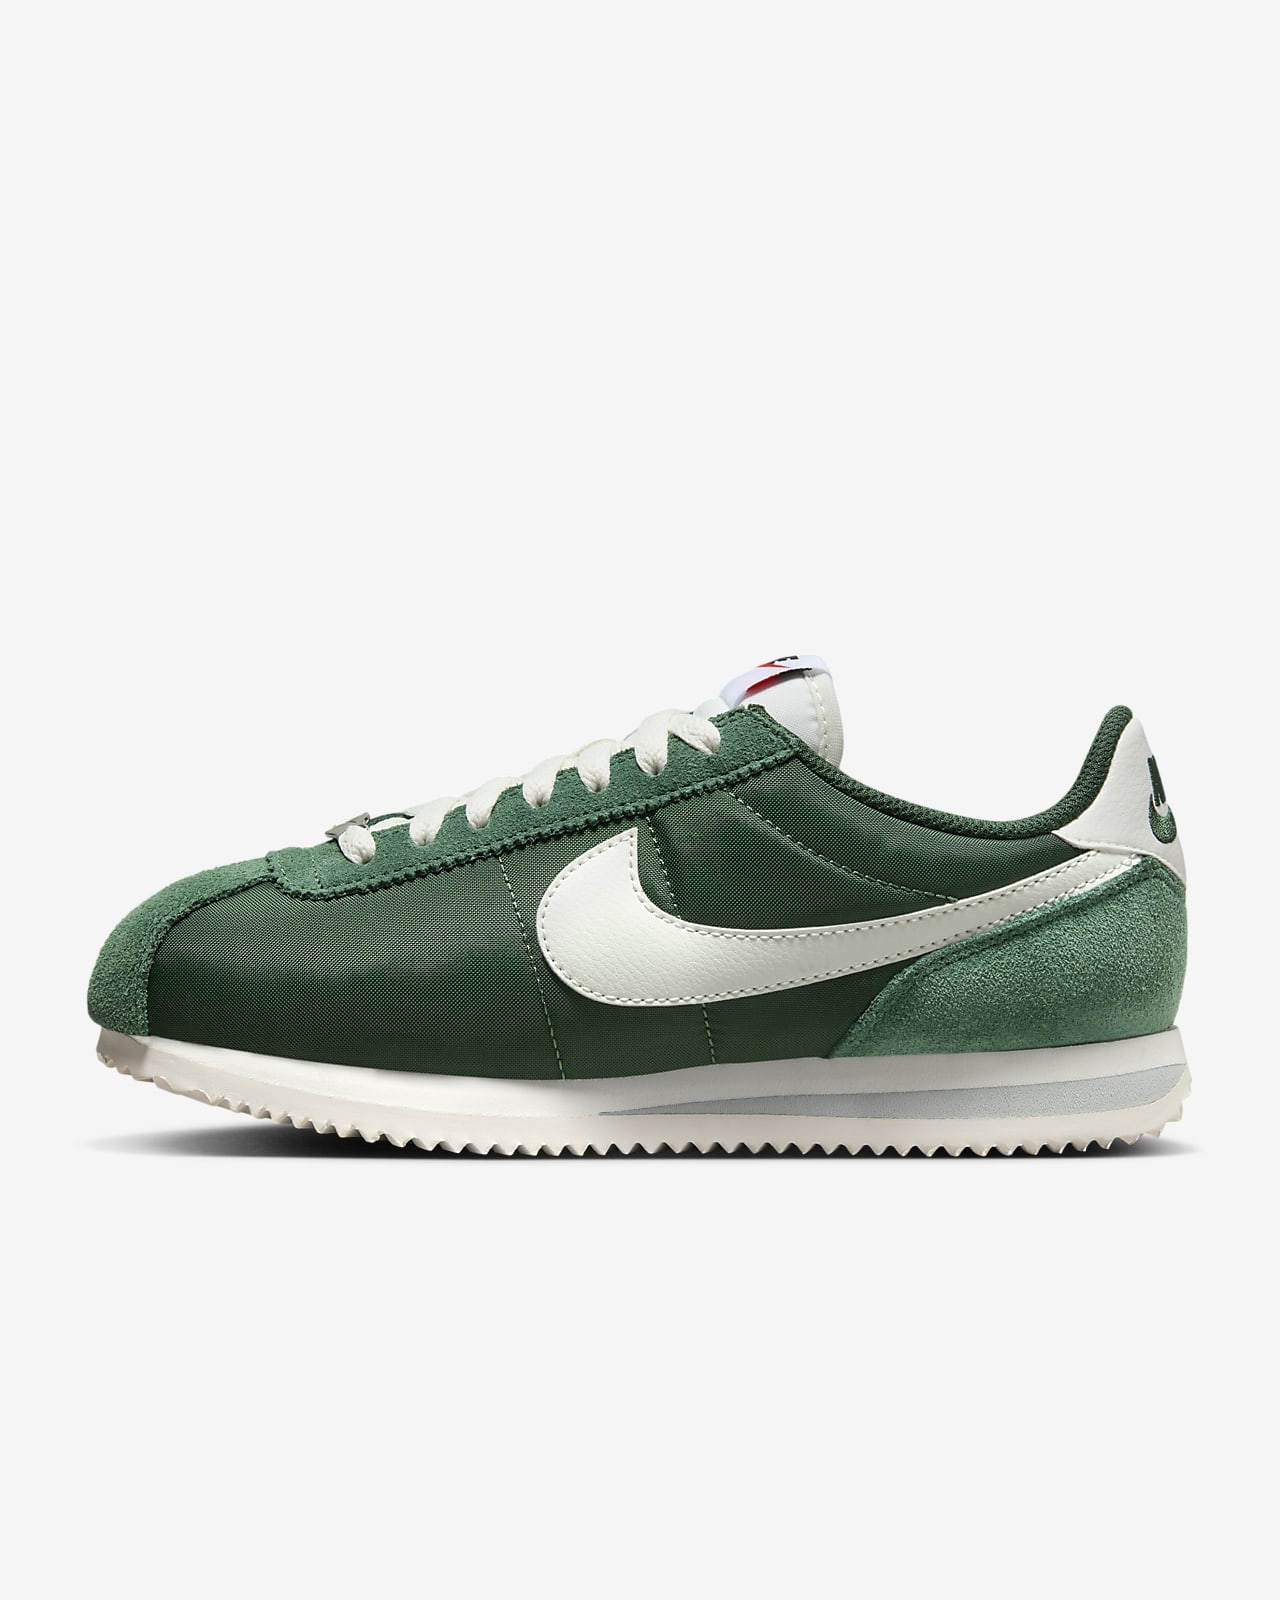 Request a design  Custom nike shoes, Nike classic cortez leather, Sneakers  fashion